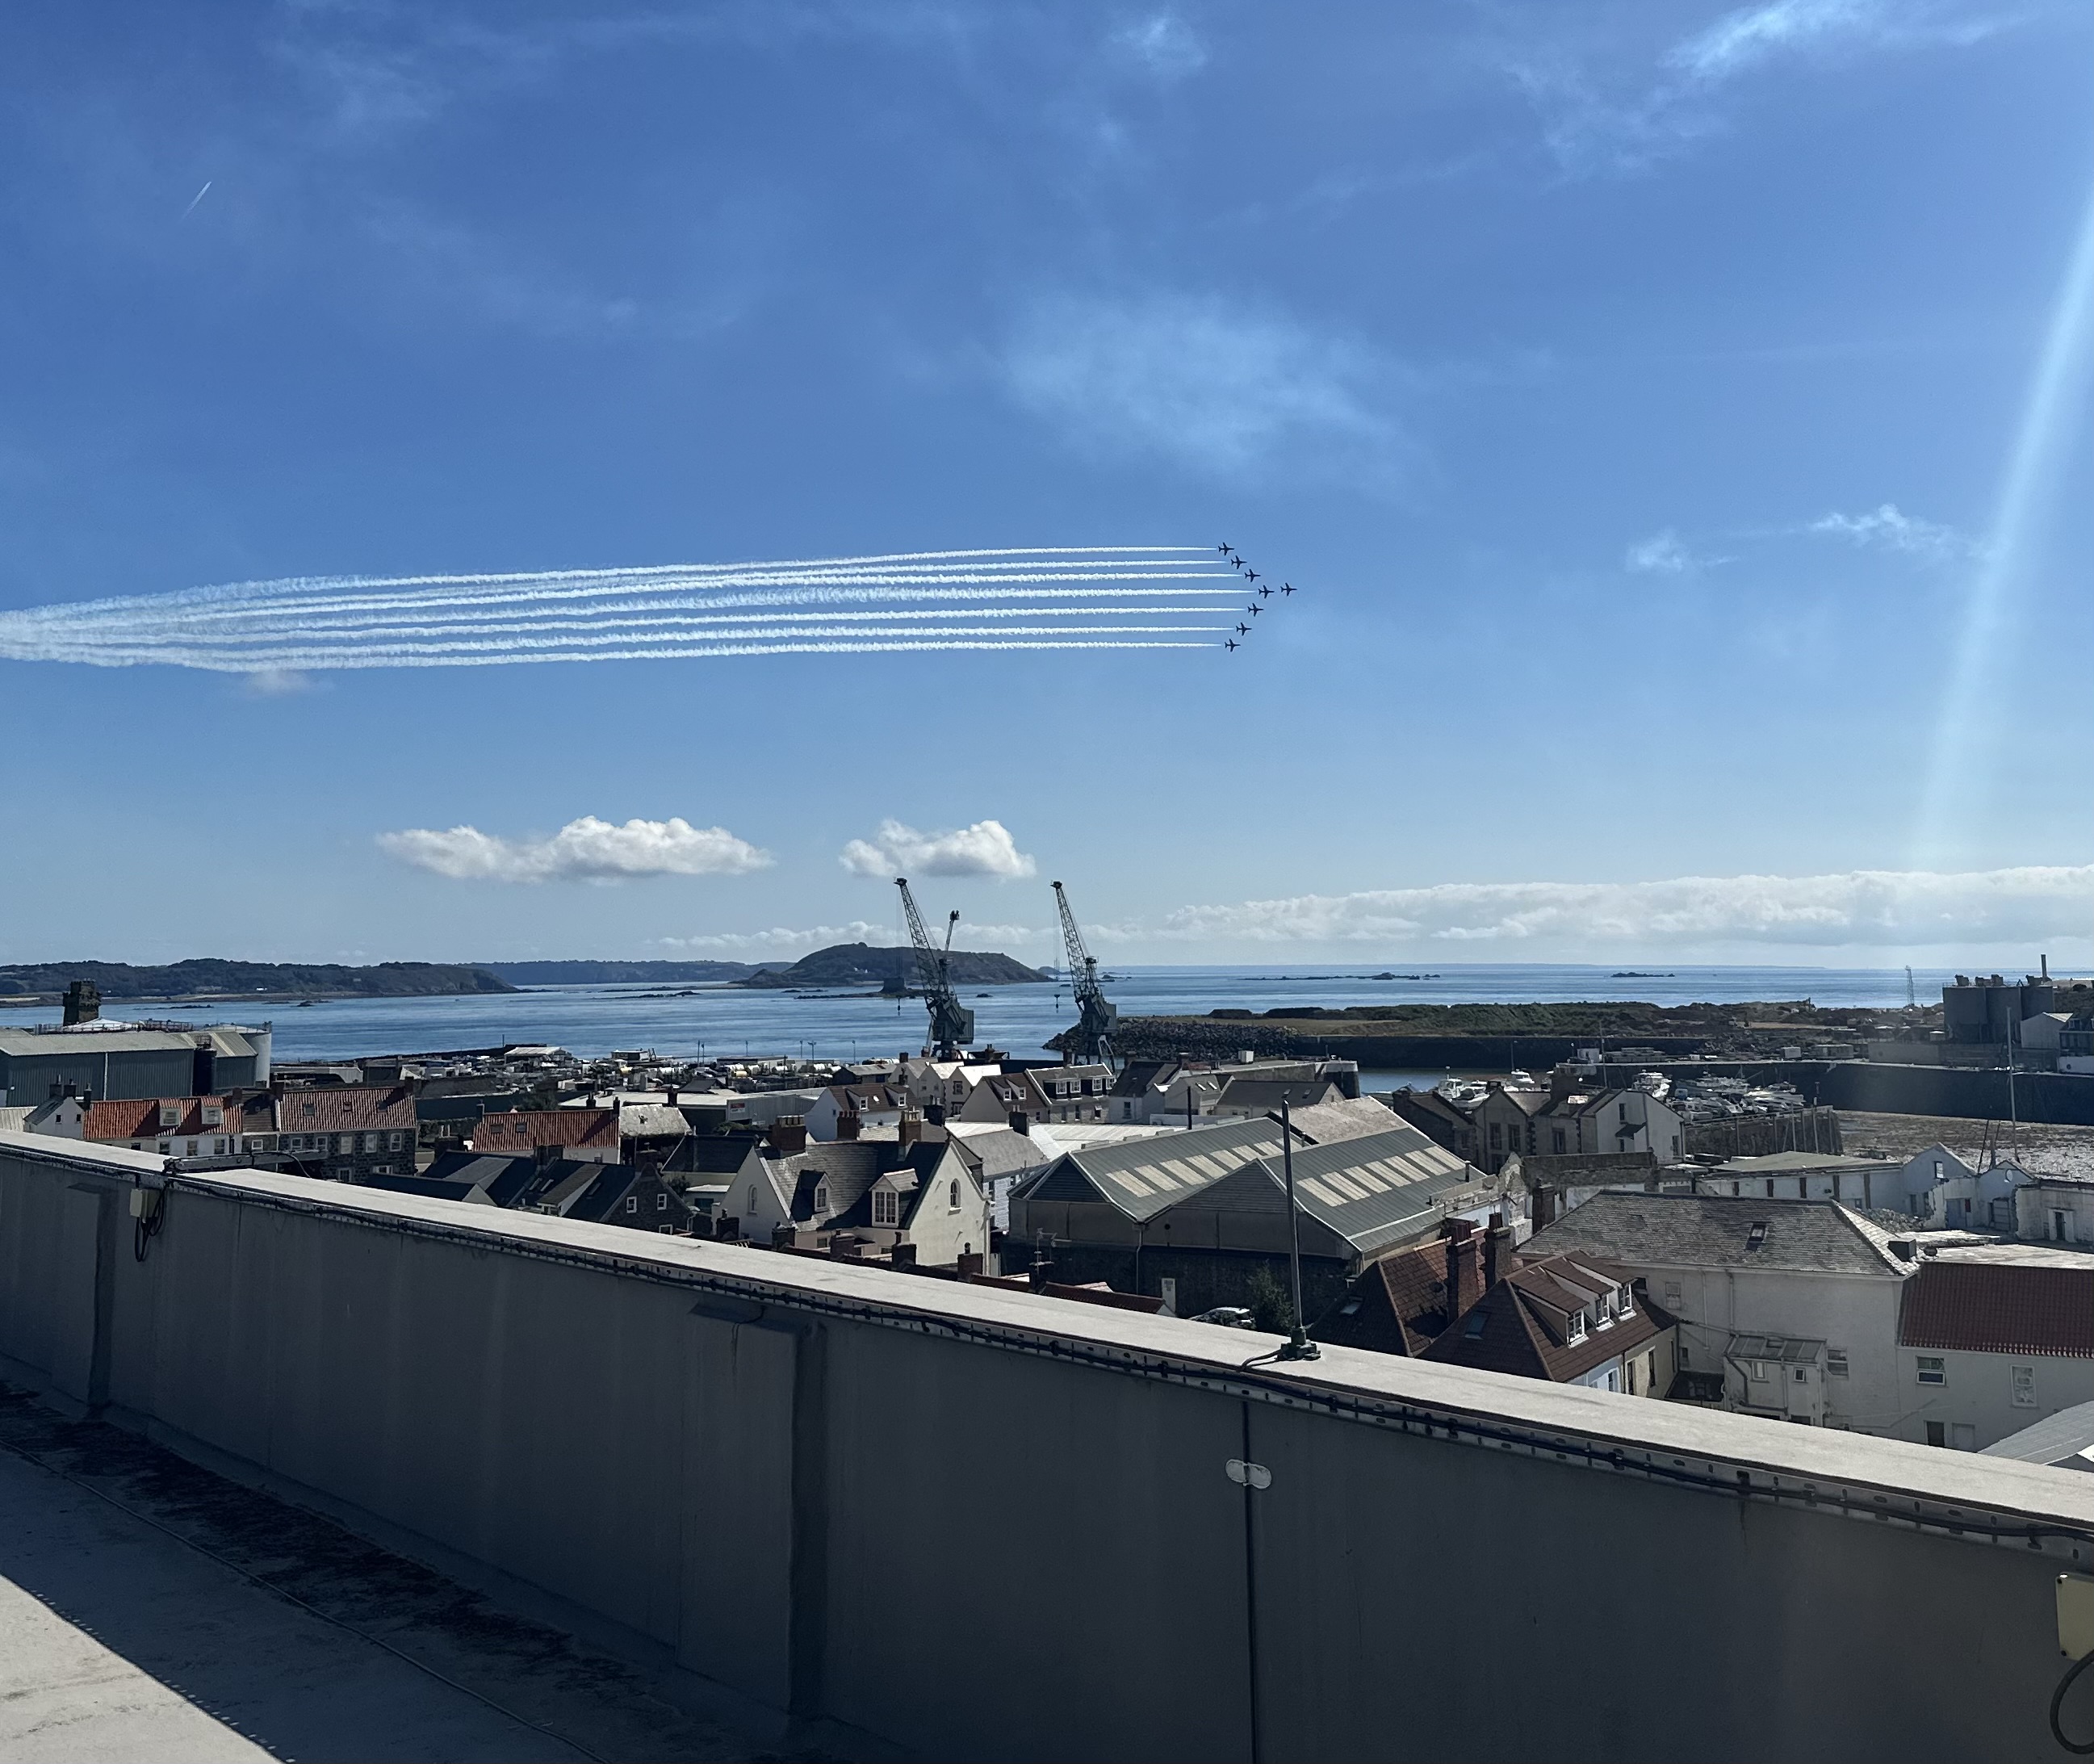 Air show from Guernsey Electricity's power station chimney